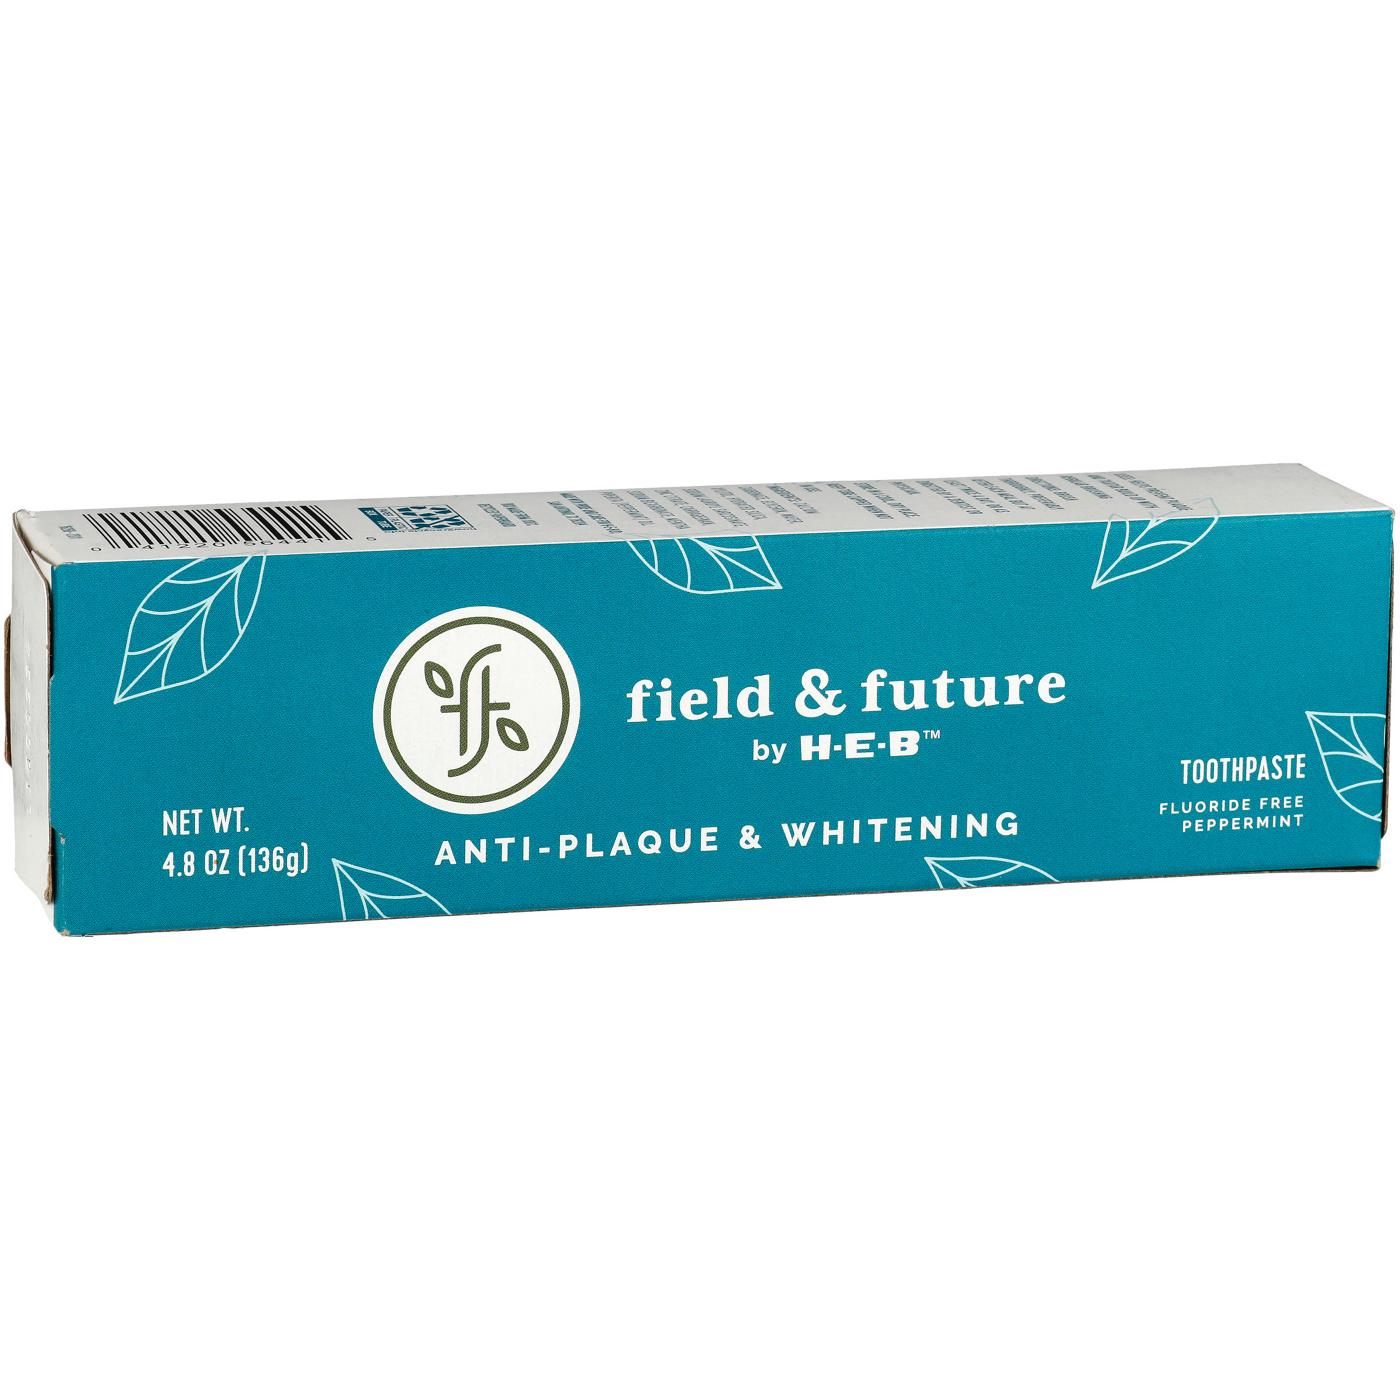 Field & Future by H-E-B Anti-Plaque & Whitening Fluoride-Free Toothpaste - Peppermint; image 6 of 6